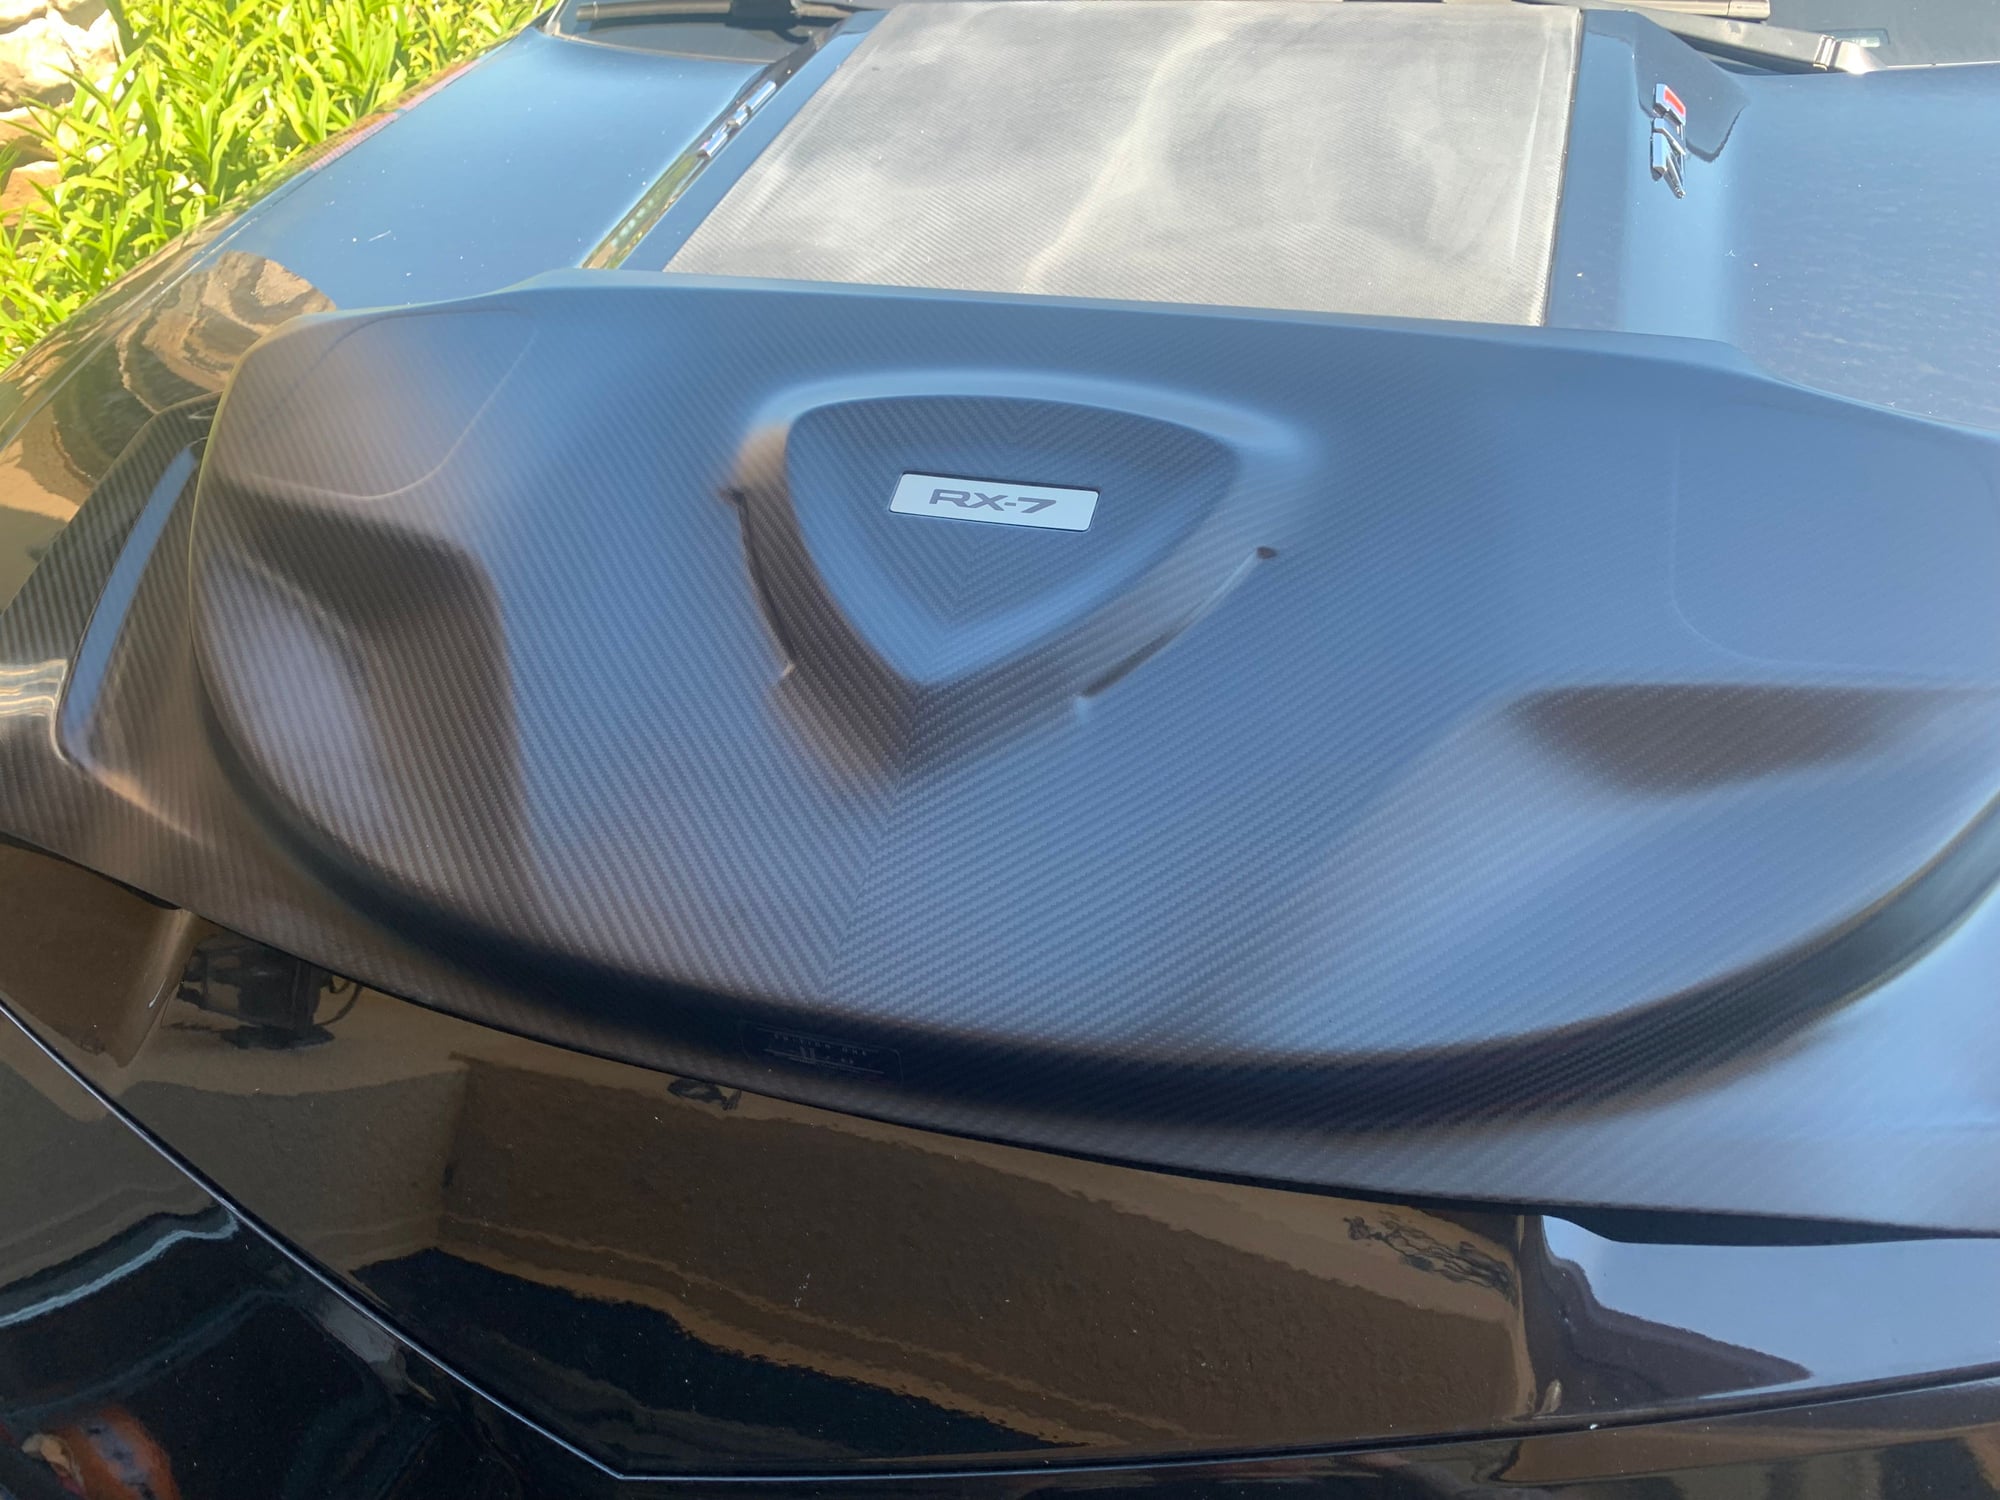 Interior/Upholstery - Carbon Fiber Privacy cover - Used - 1993 to 2002 Mazda RX-7 - Kissimmee, FL 34746, United States